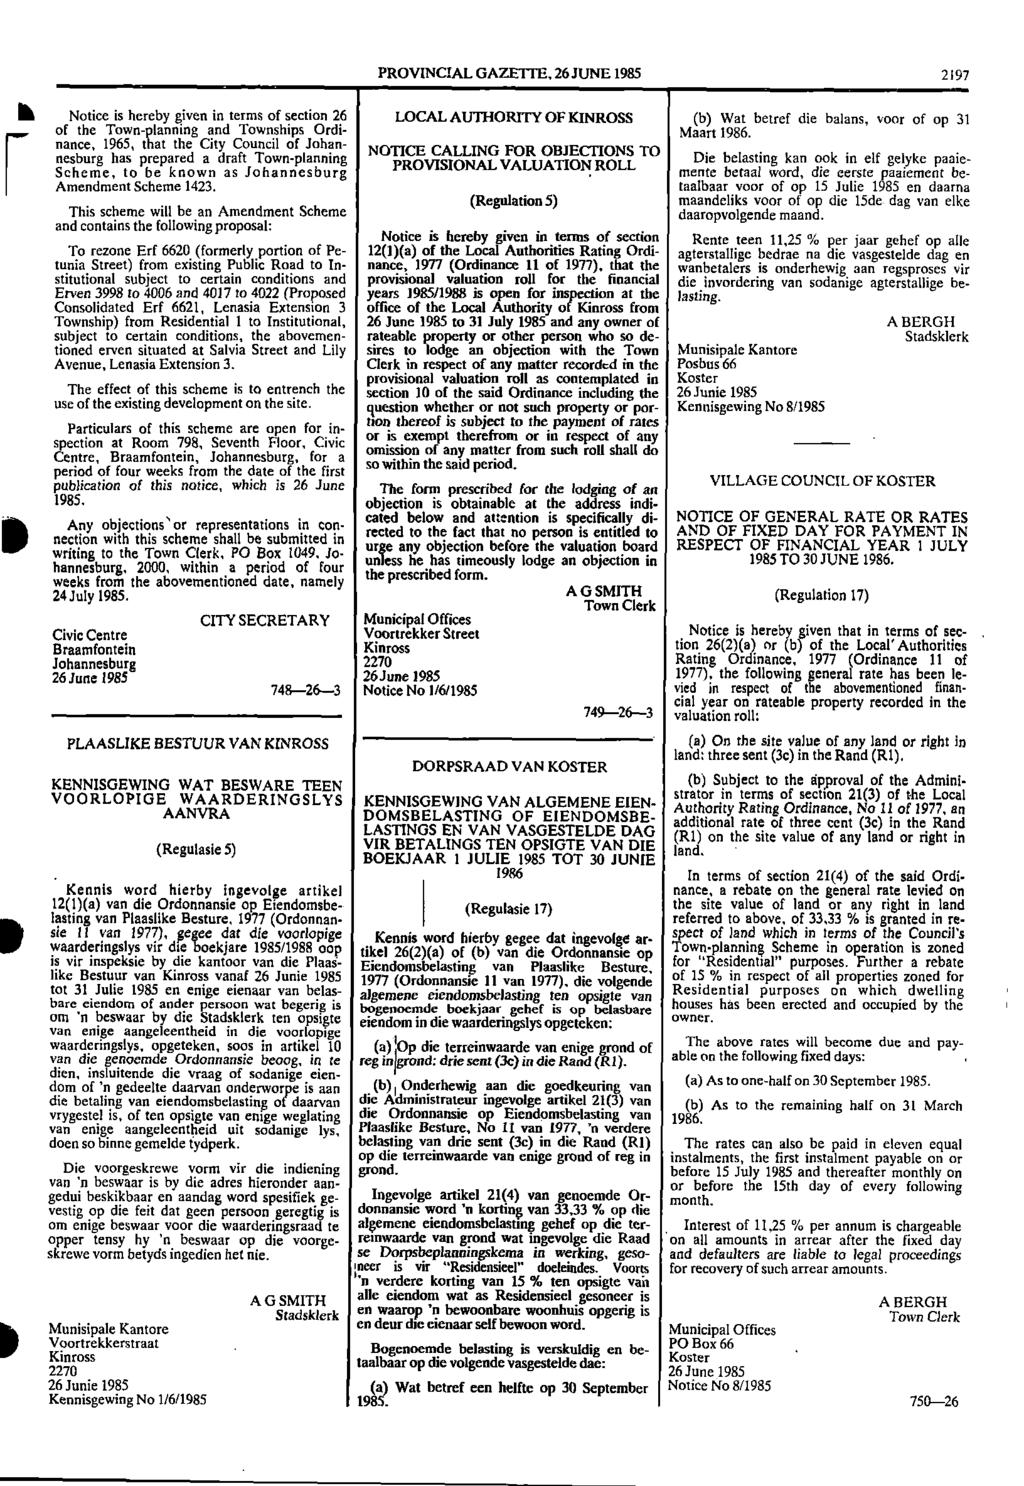 PROVINCIAL GAZETTE, 26 JUNE 1985 2197 11 Notice is hereby given in terms of section 26 LOCAL AUTHORITY OF KINROSS (b) Wat betref die balans, voor of op 31 of the Town planning and Townships Ordi